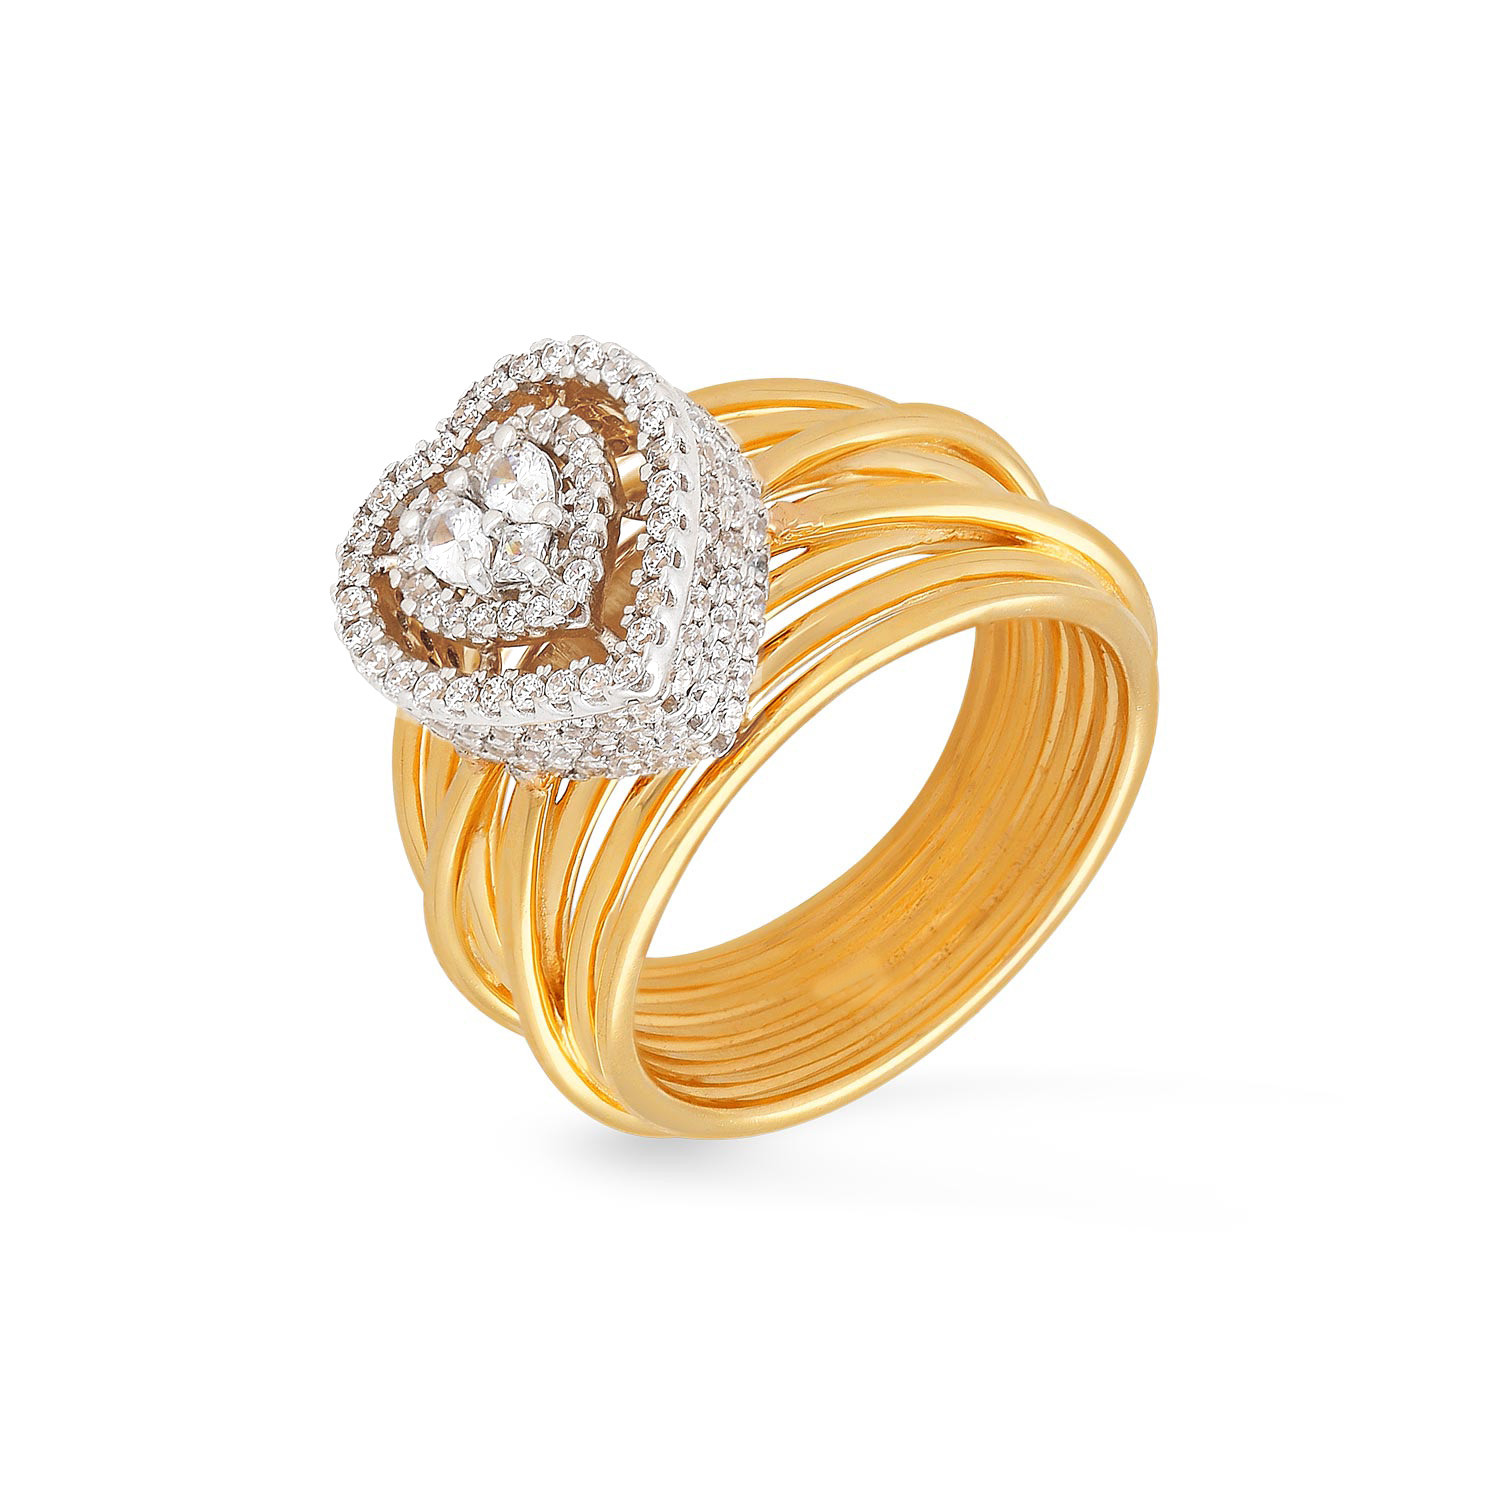 Buy Malabar Gold and Diamonds 18k Rose Gold & Diamond Floral Ring Online At  Best Price @ Tata CLiQ